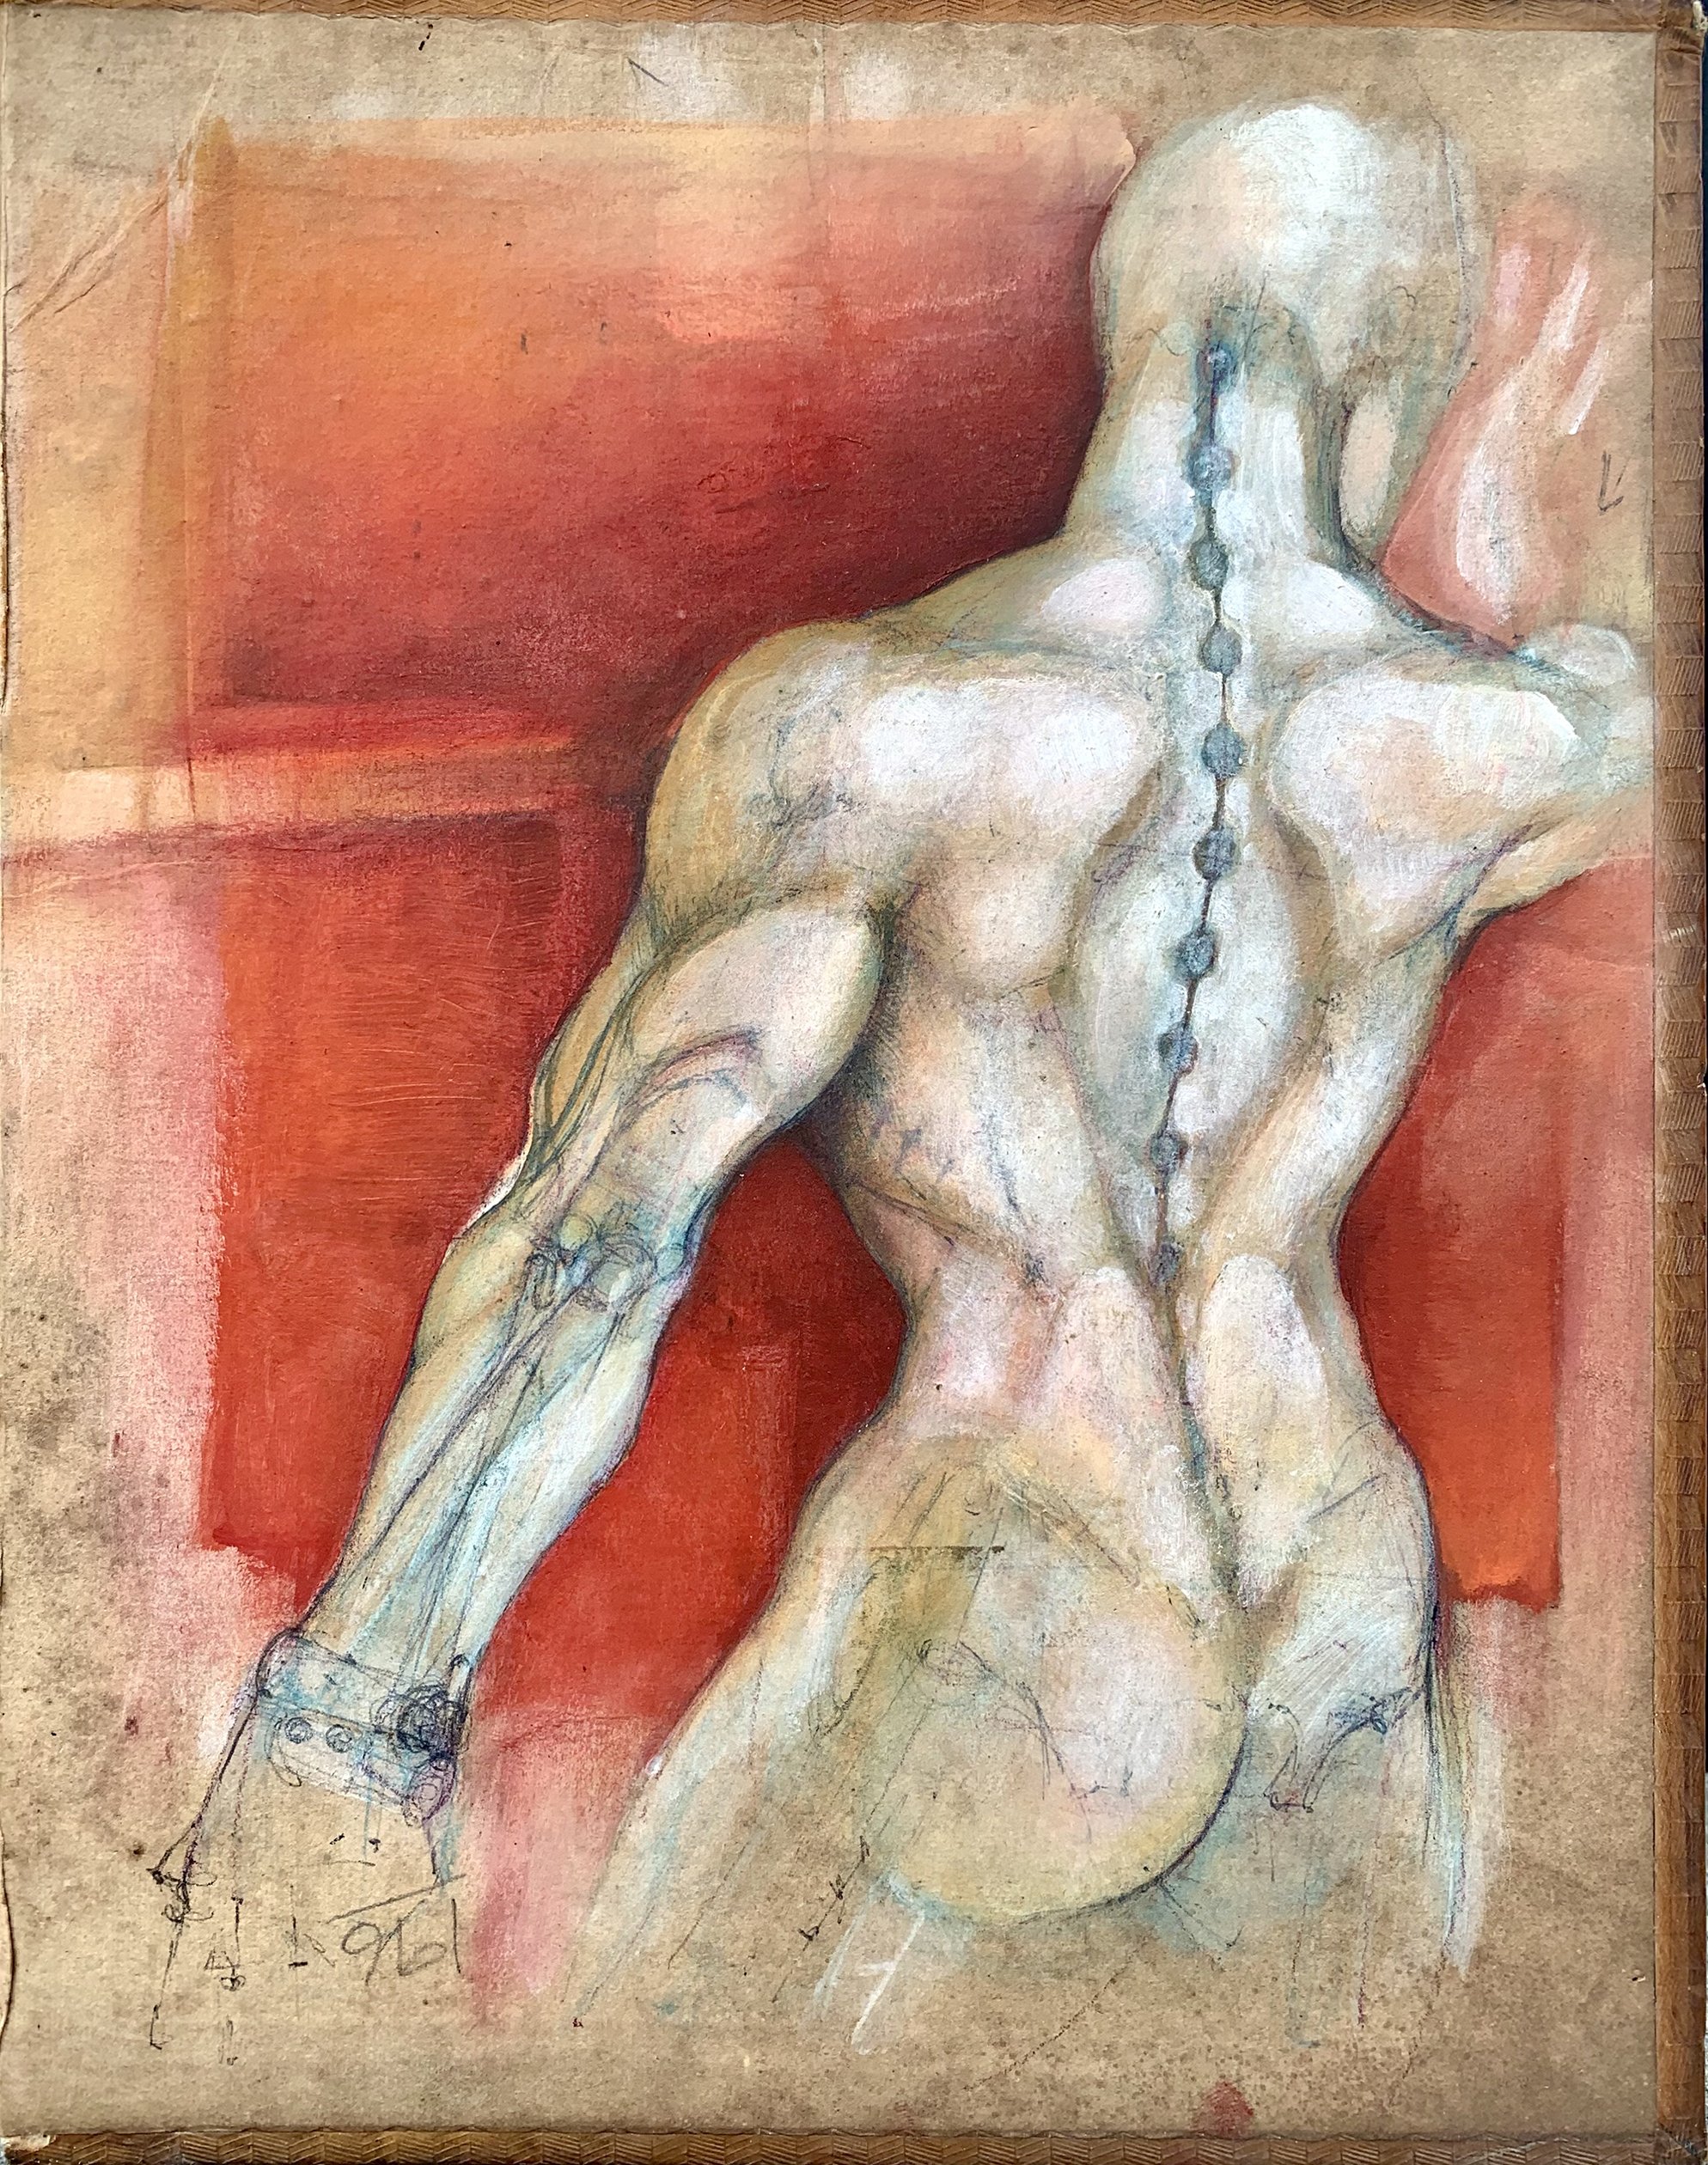   NUDE 1   8.5” x 11”  Oil on Leather-bound Book Cover       